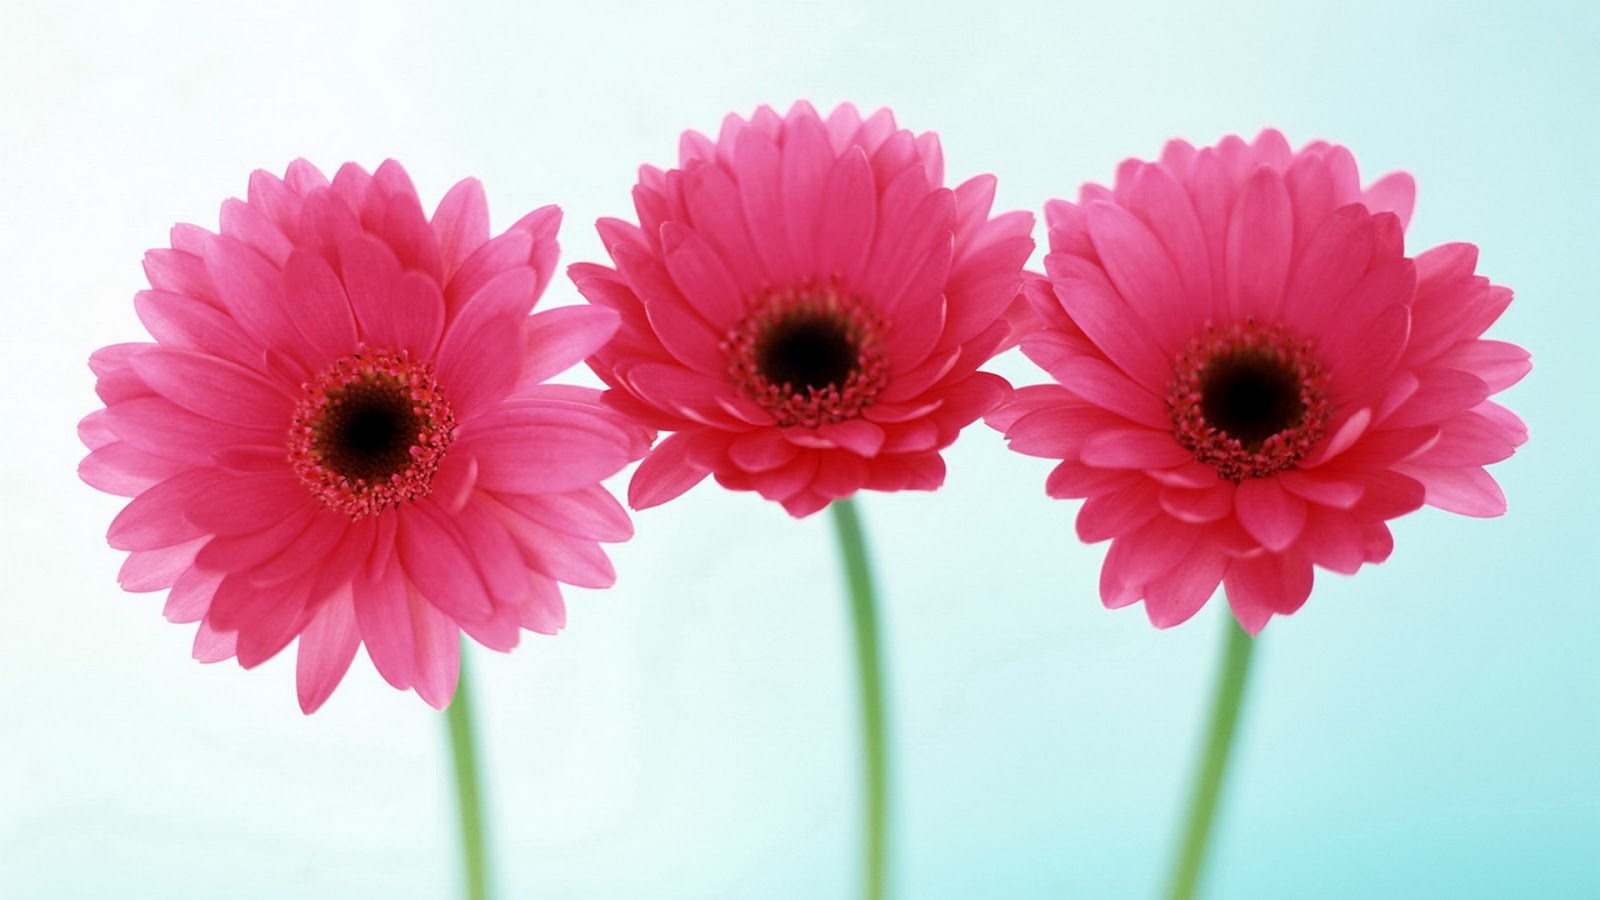 flowers for flower lovers HD flowers wallpapers 1600x900